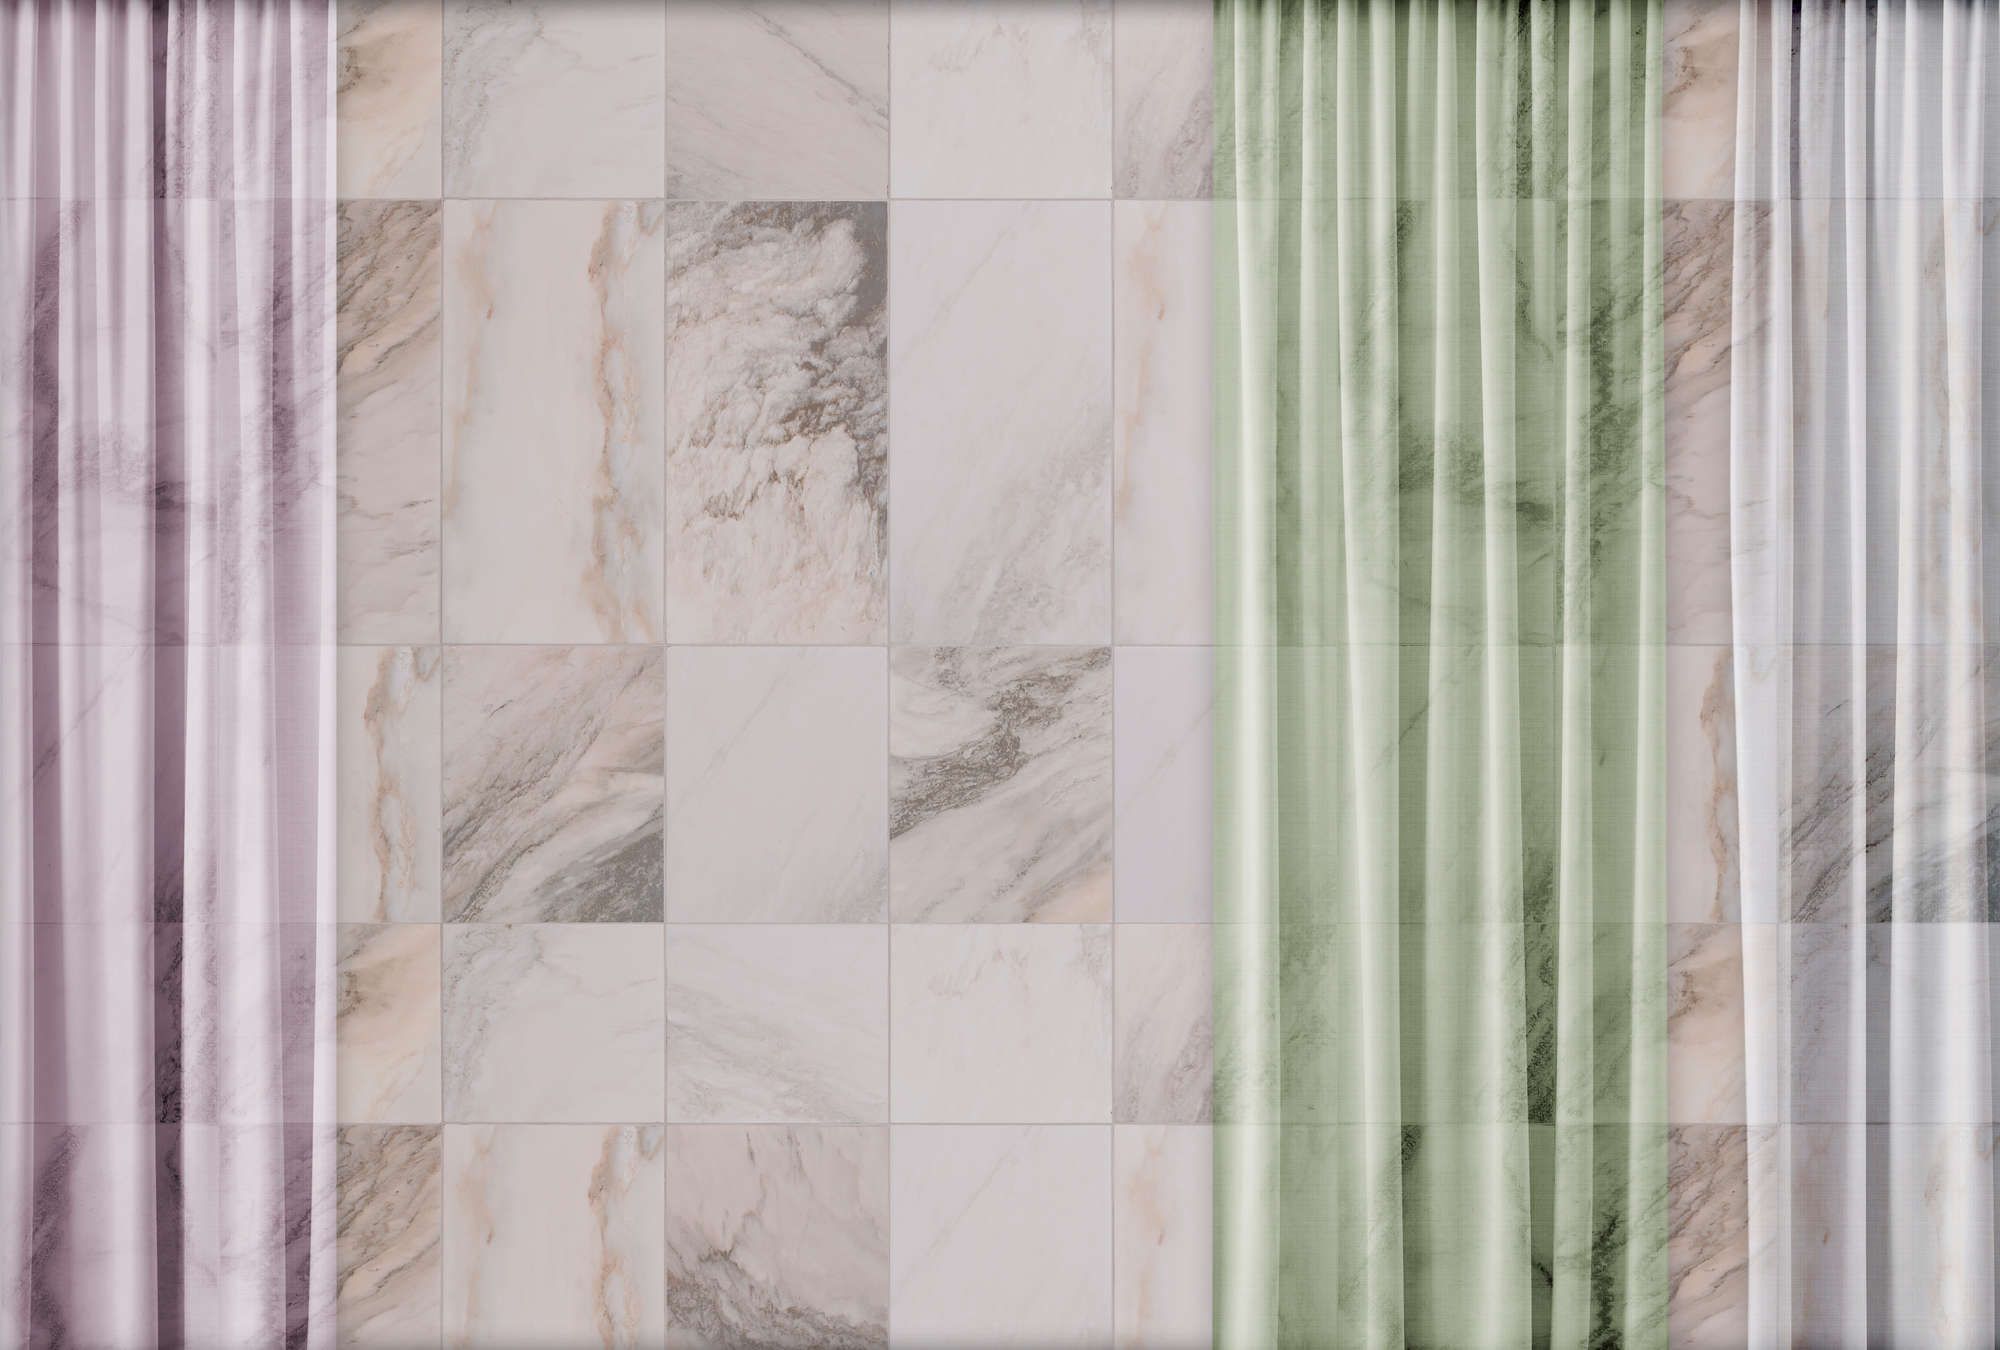             Photo wallpaper »nova 2« - Pastel-coloured curtains against a beige marble wall - Smooth, slightly pearlescent non-woven fabric
        